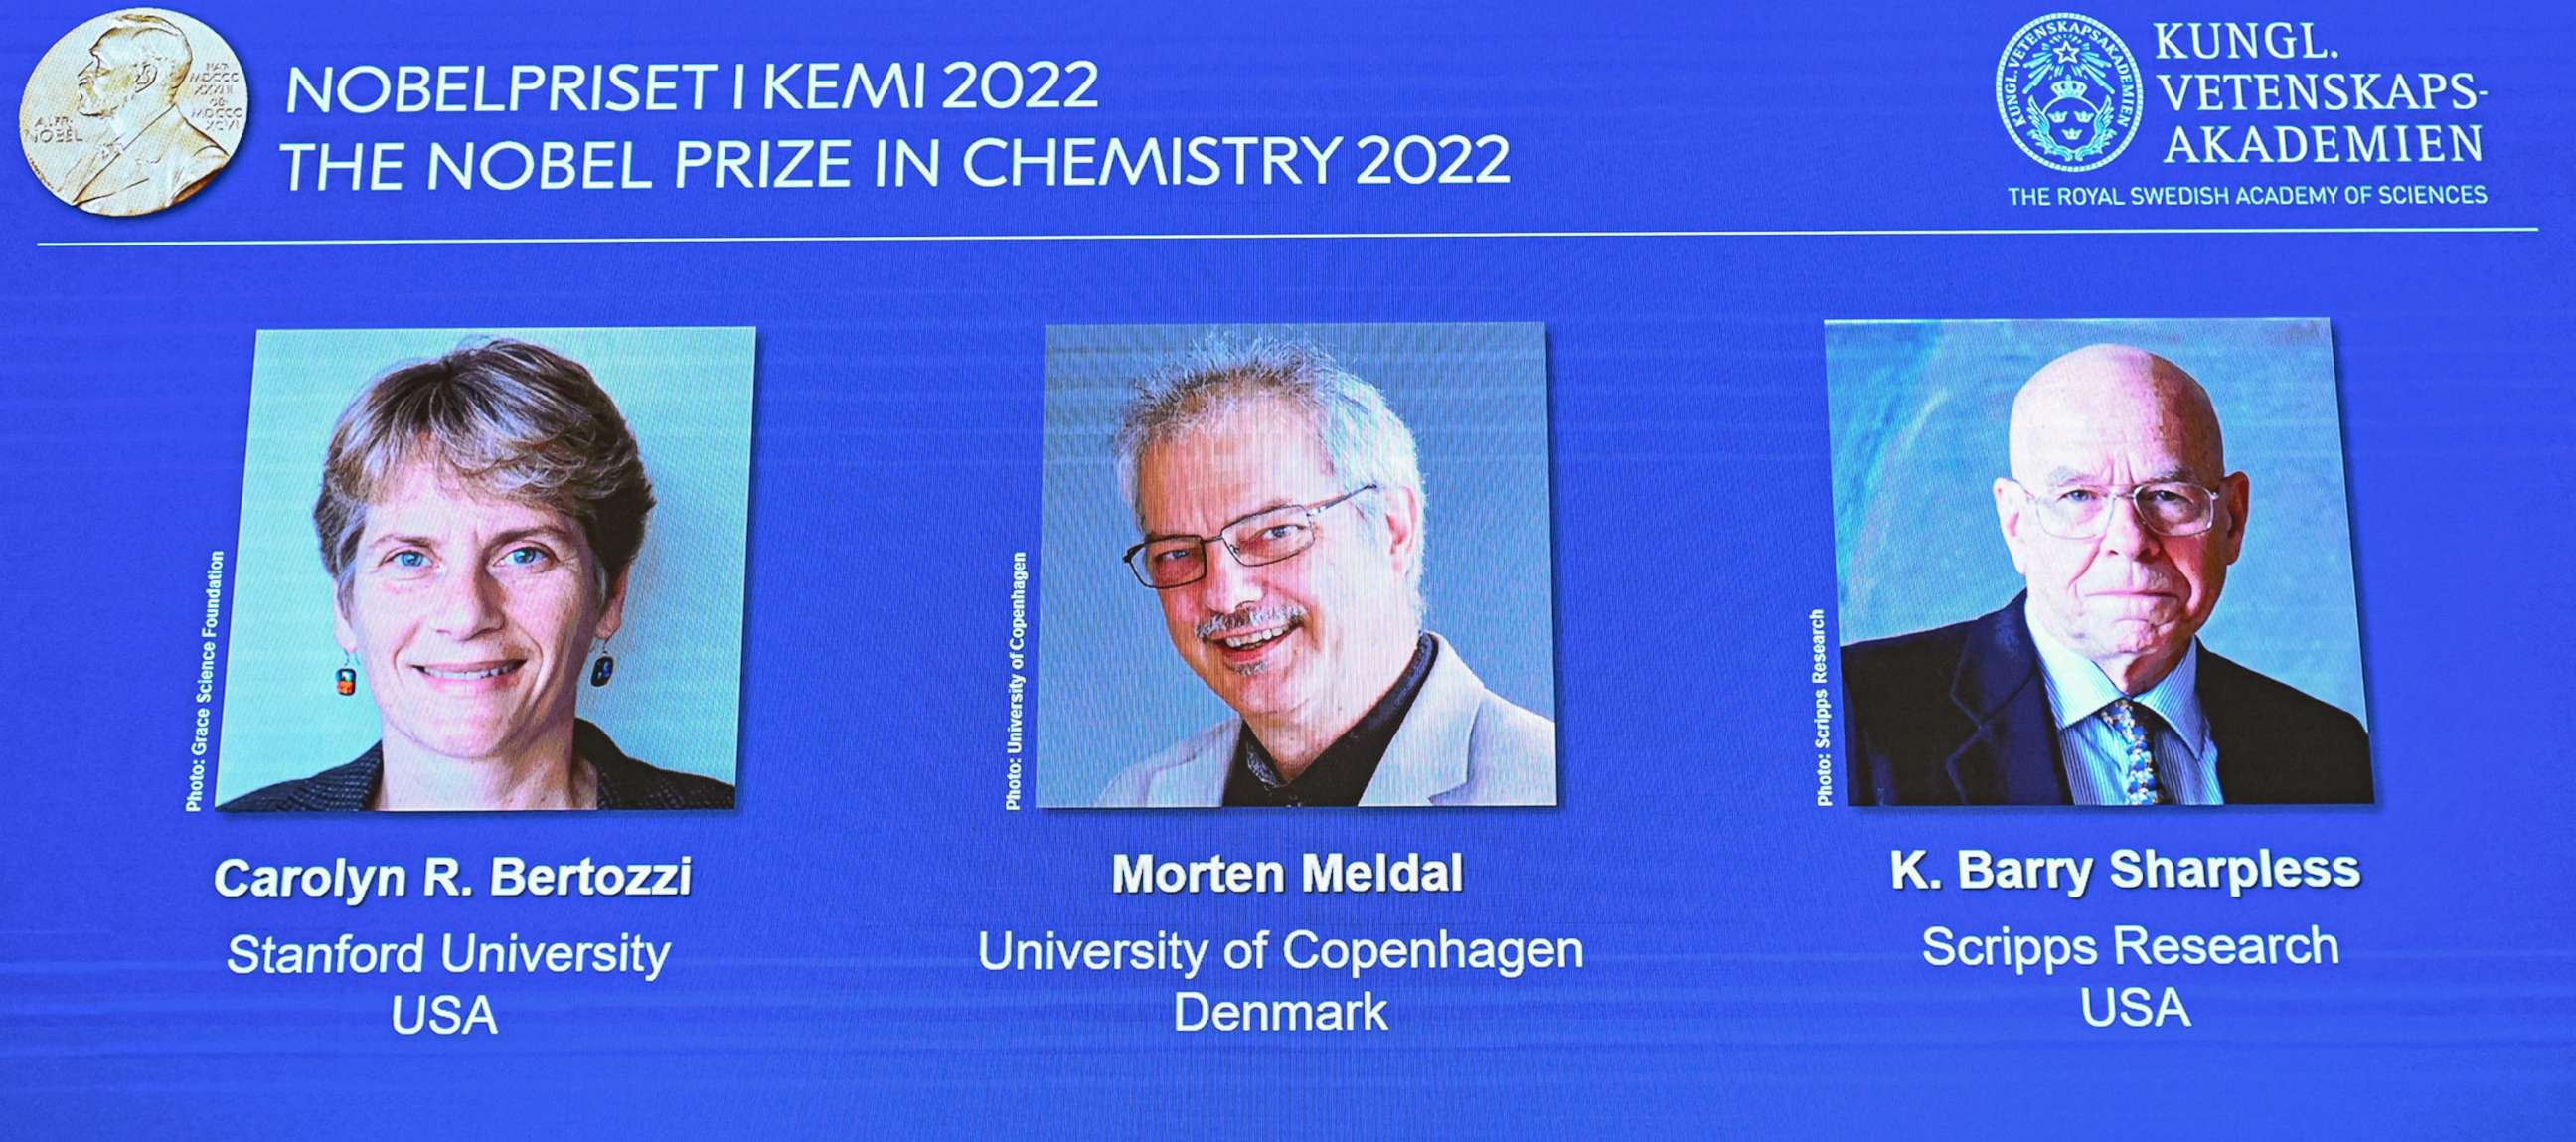 PHOTO: A display shows the winners of the 2022 Nobel Prize in Chemistry, US's Carolyn Bertozzi (L) and Barry Sharpless (R), and Denmark's Morten Meldal (C) during a press conference at the Royal Swedish Academy of Sciences in Stockholm, on Oct. 5, 2022. 